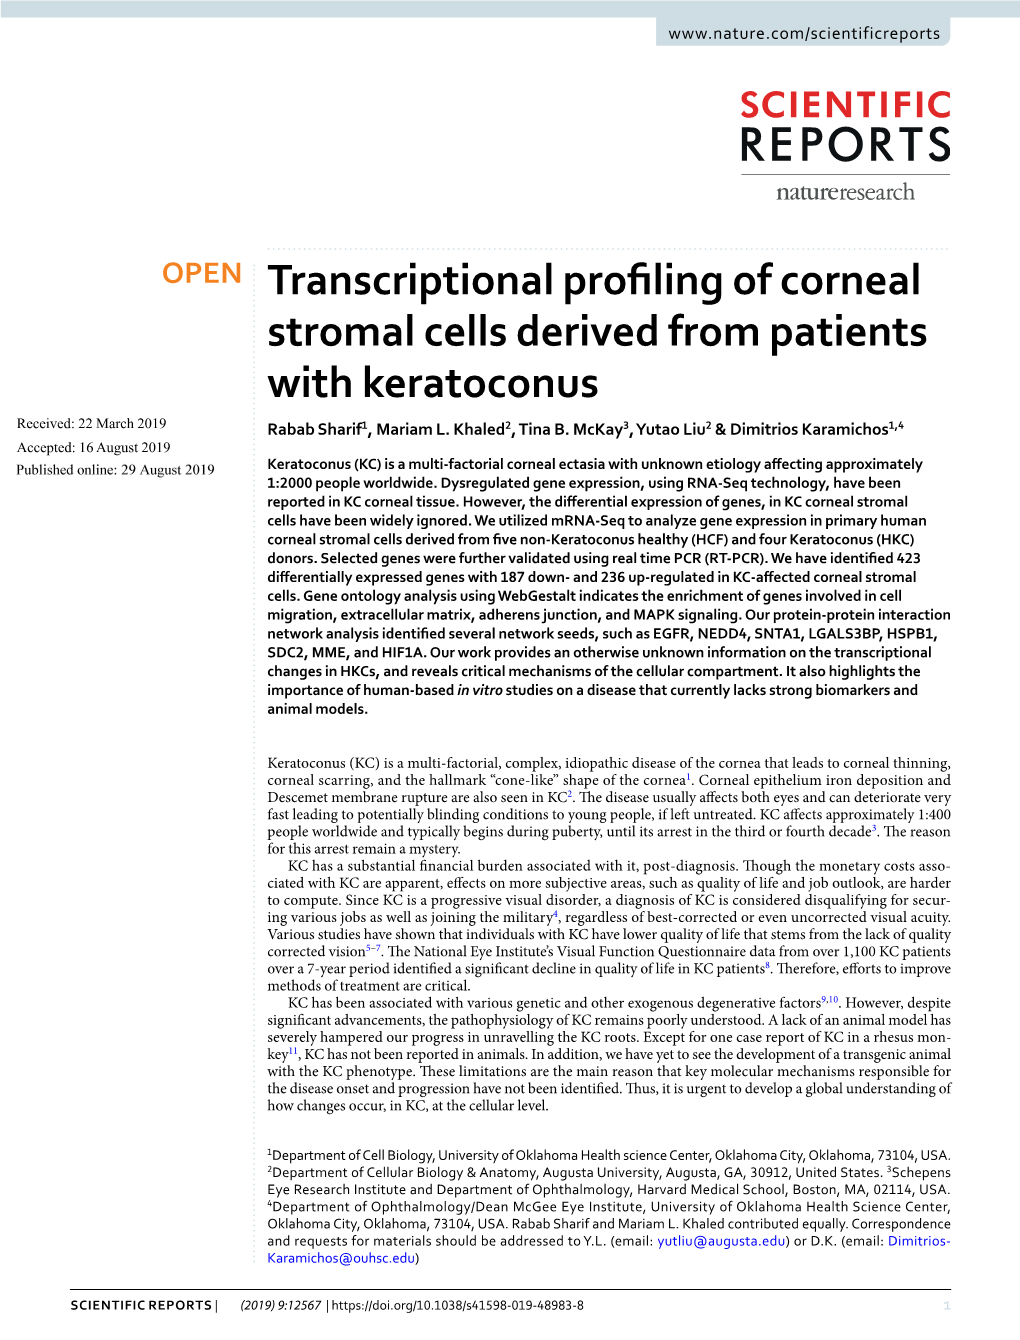 Transcriptional Profiling of Corneal Stromal Cells Derived from Patients